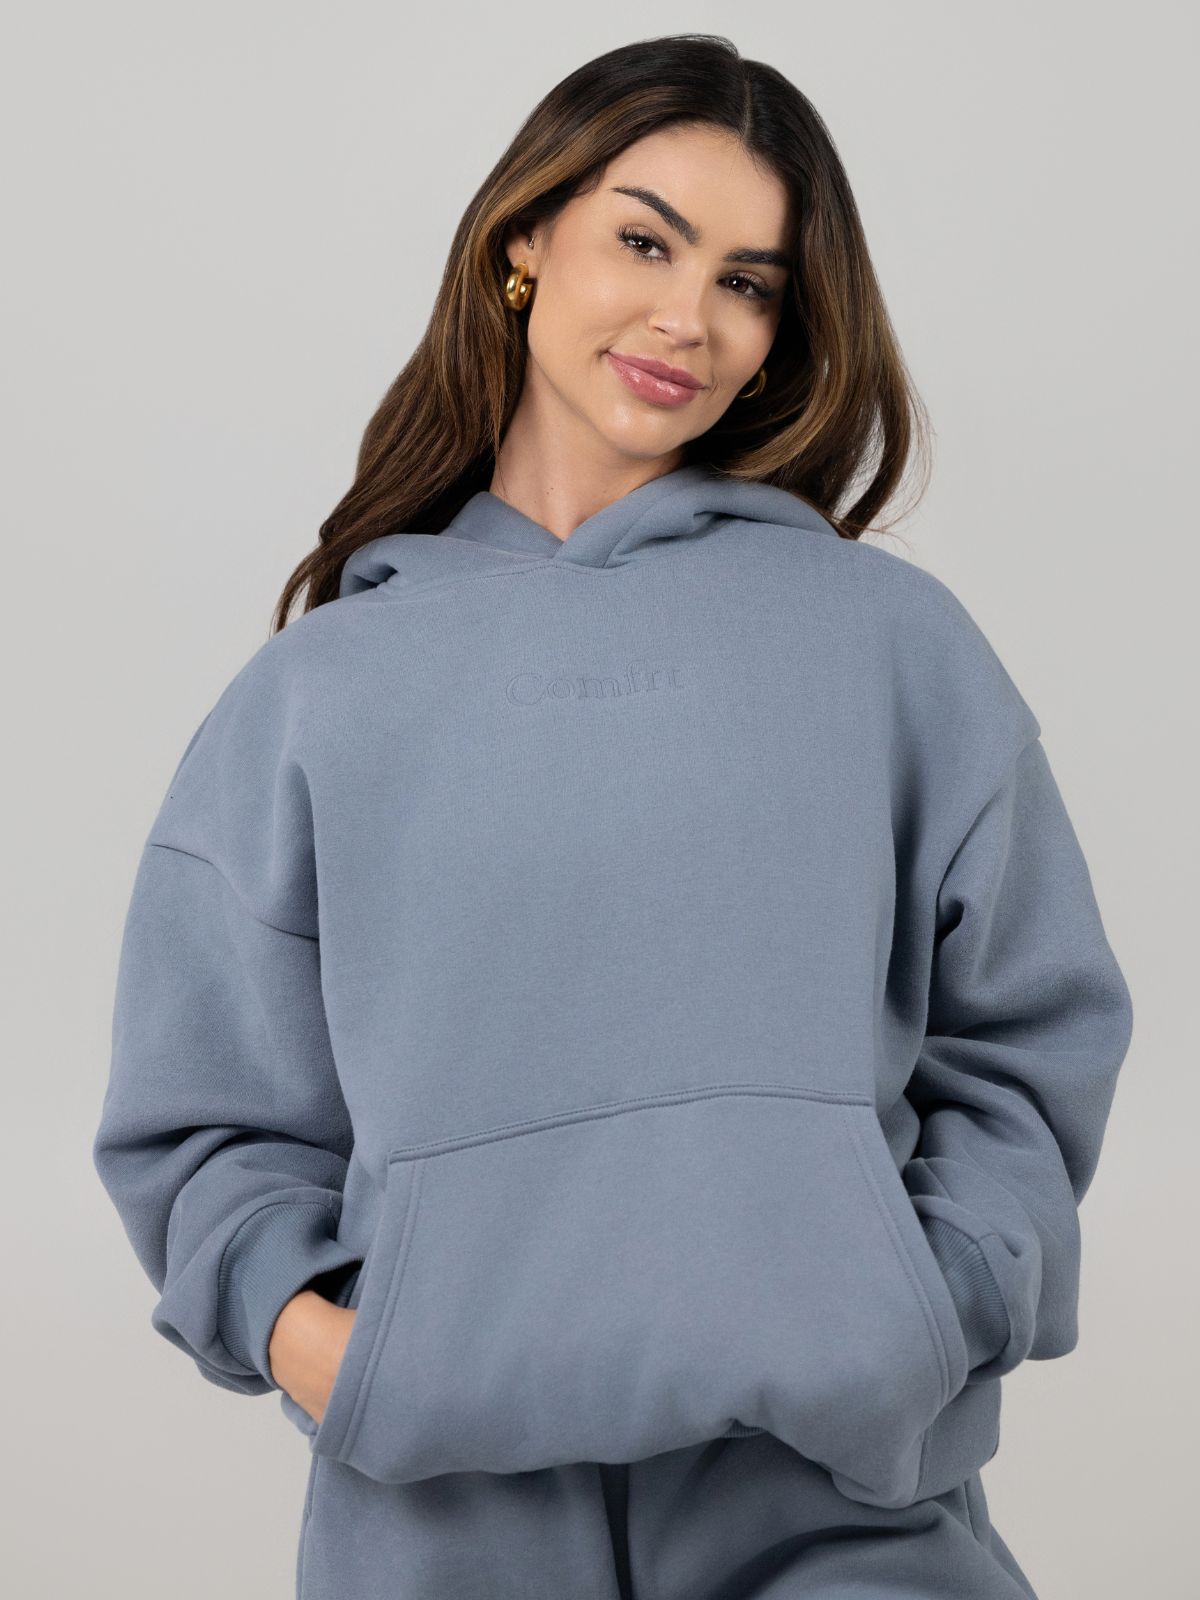 Comfrt Hoodie Gray Size M - $52 (25% Off Retail) - From Abby